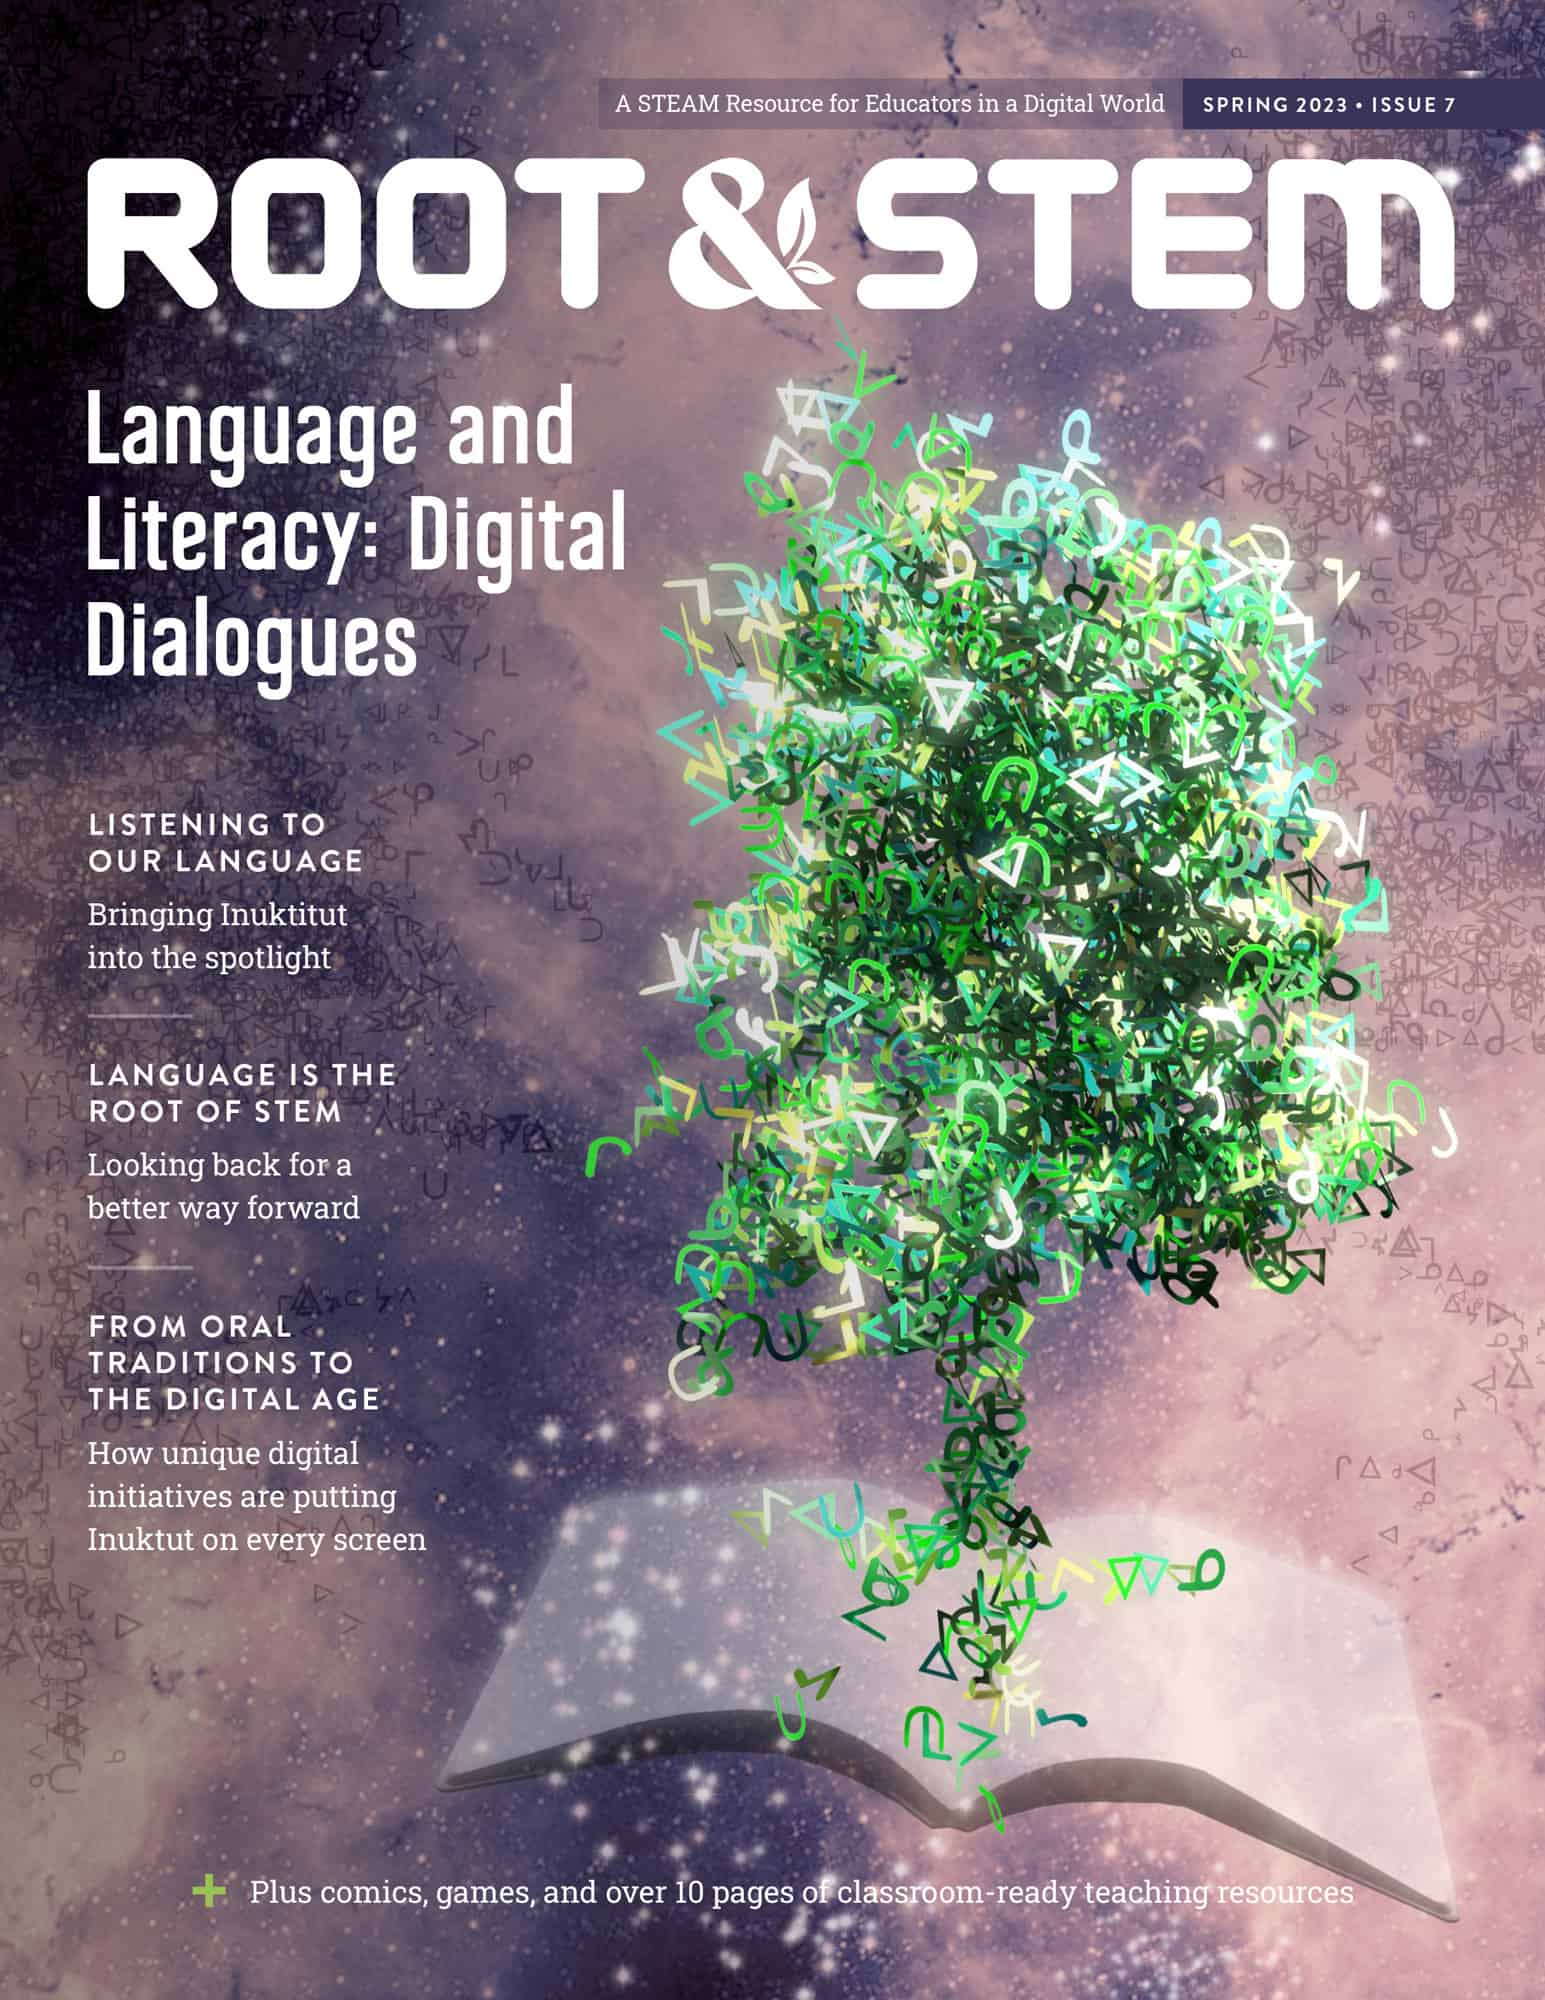 The cover of Root & STEM issue 7